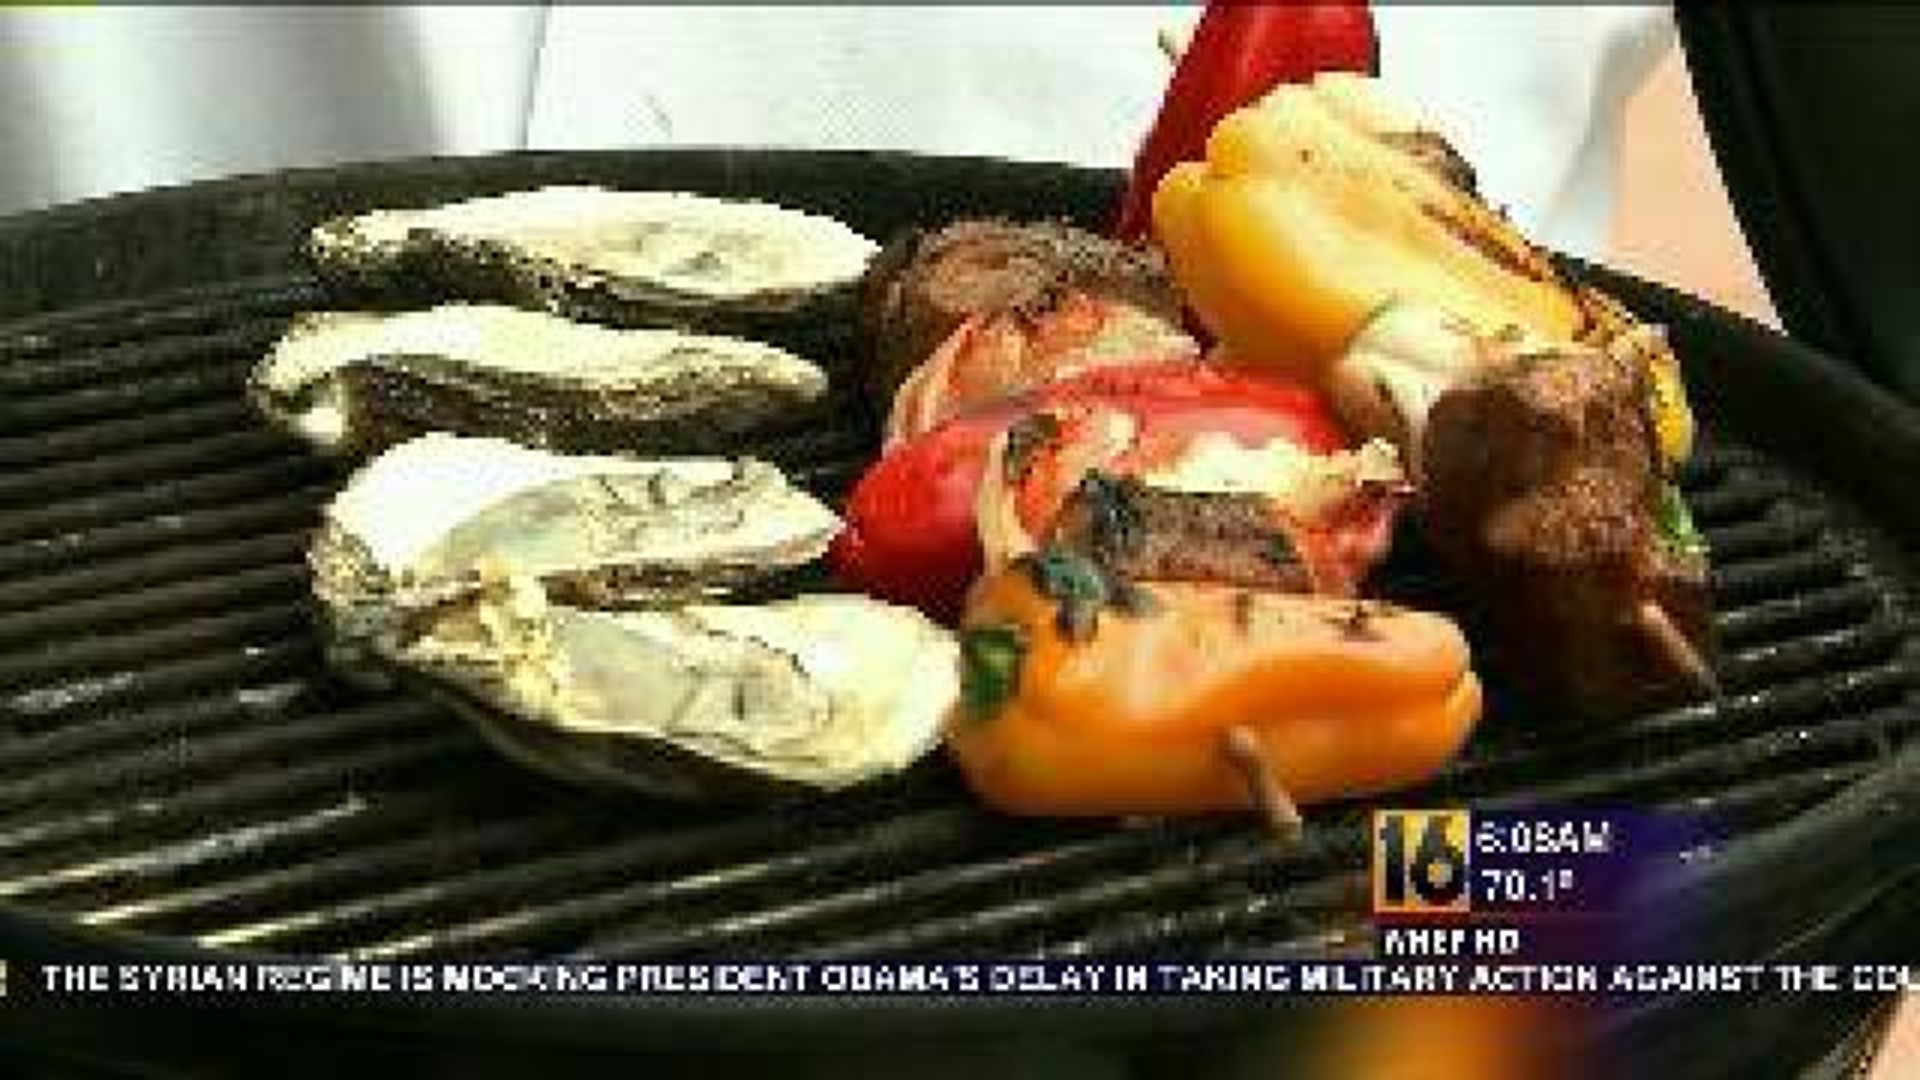 Labor Day: Big for Babies and Backyard Barbecues